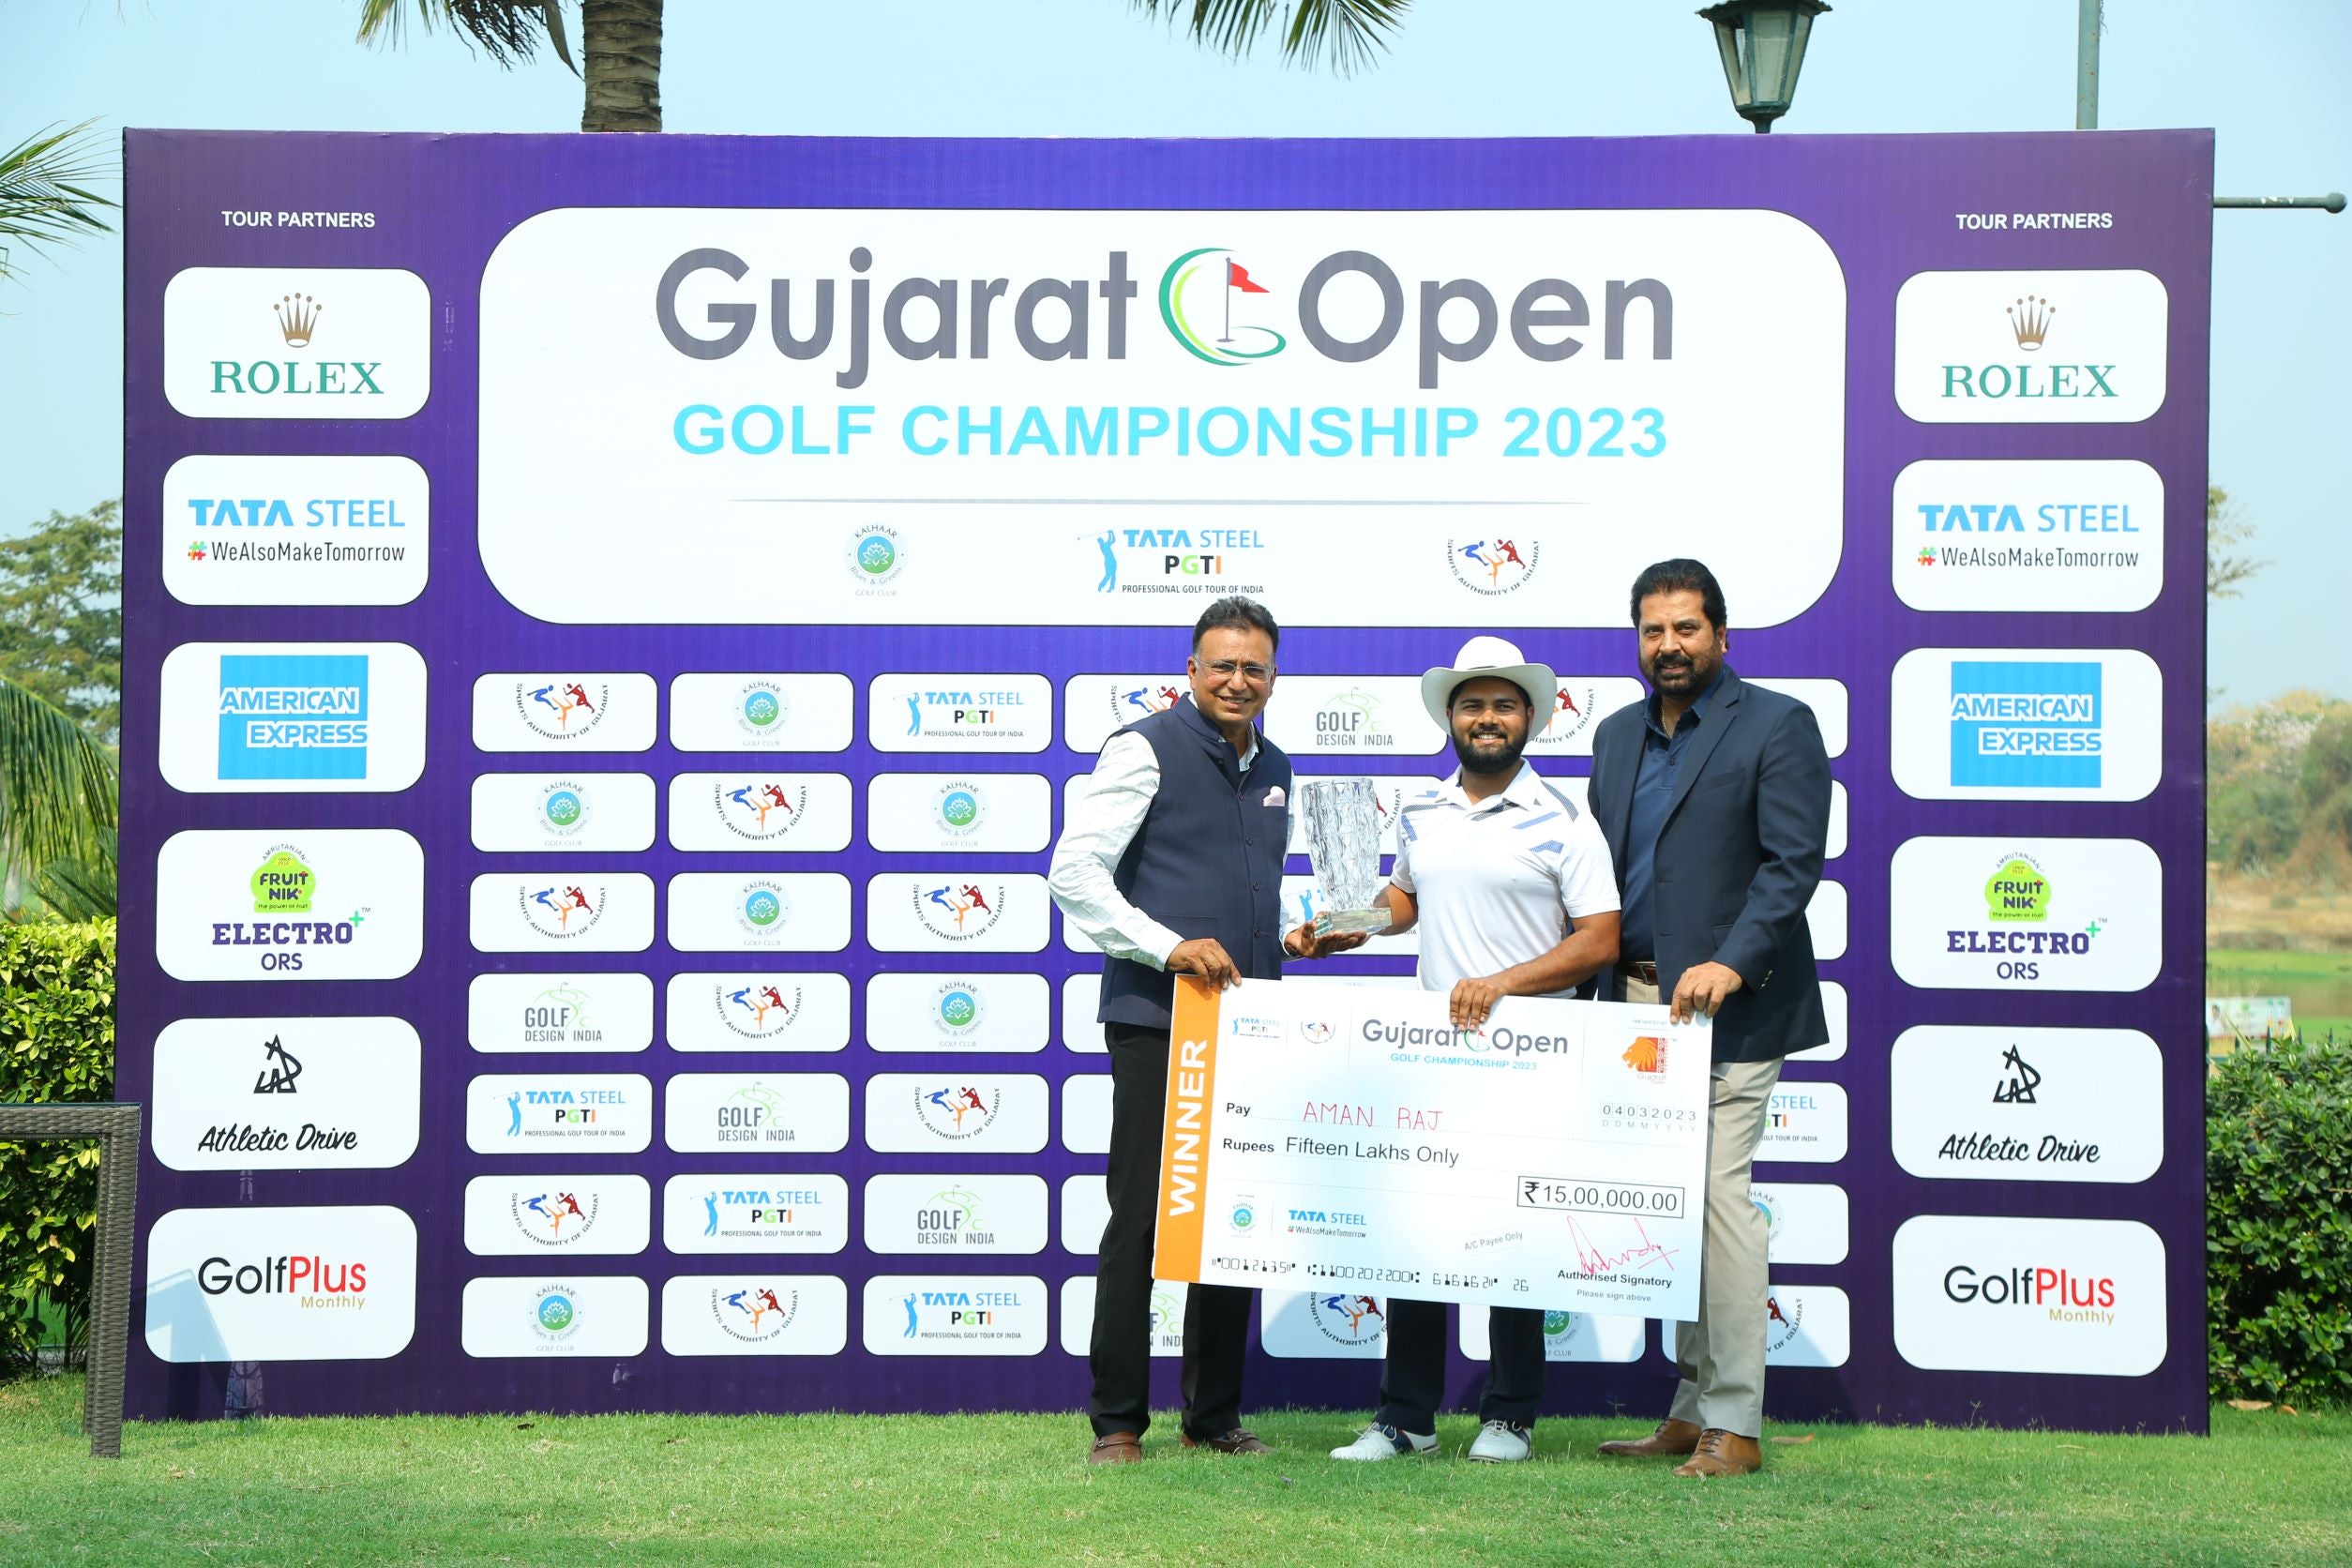 Aman Raj closes it out with a stoic final round 73 at Gujarat Open Golf Championship 2023